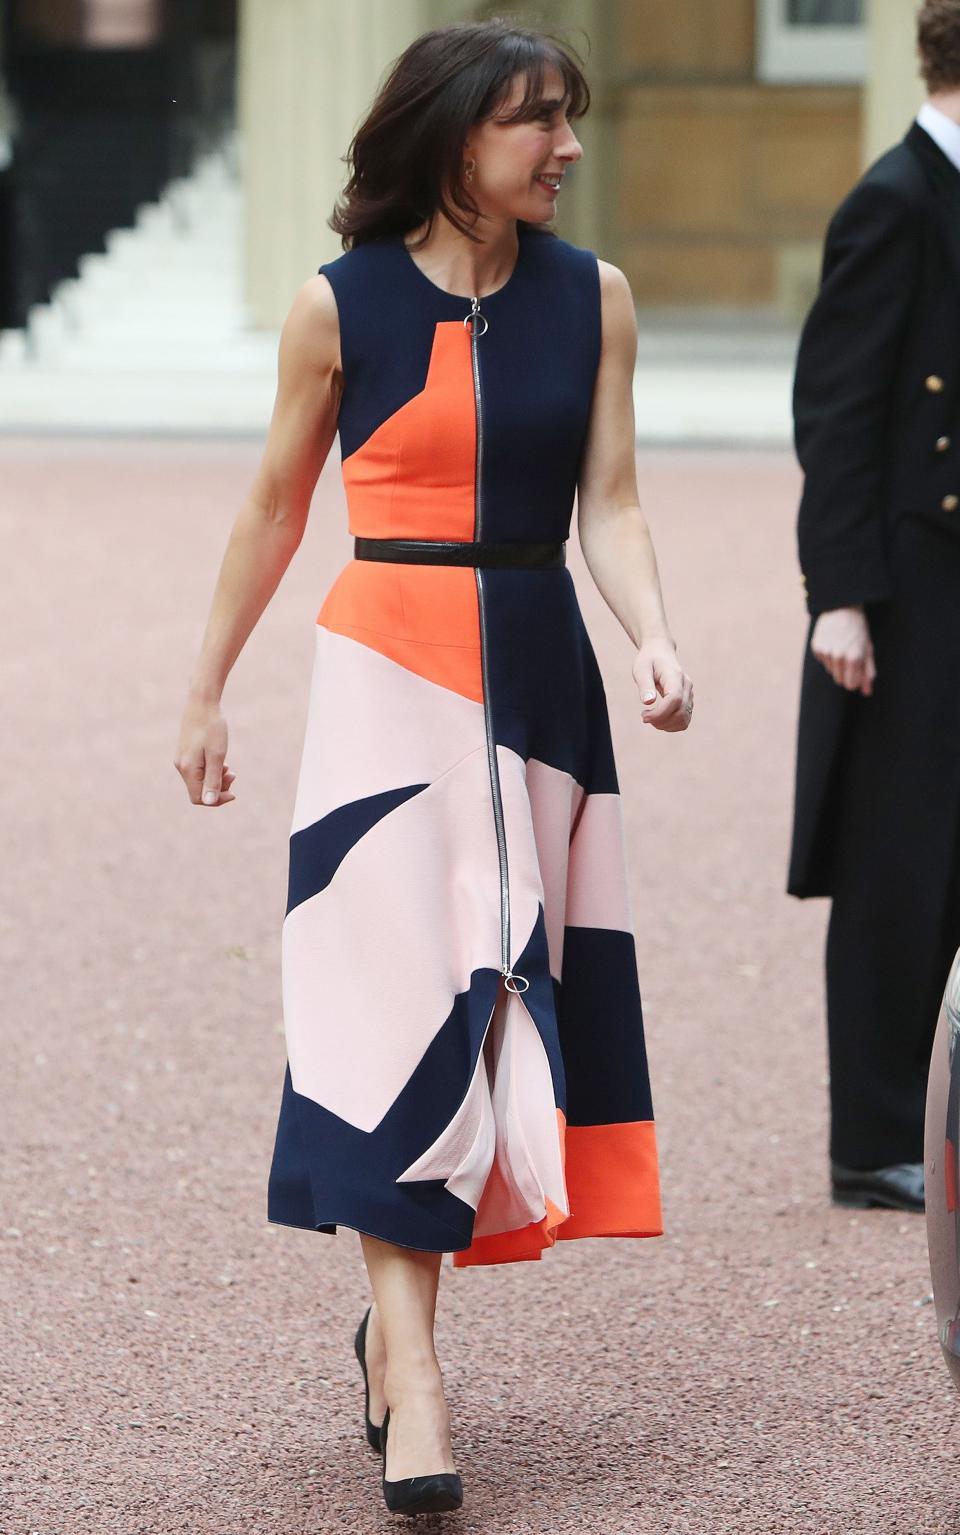 Samantha Cameron's new fashion label Cefinn goes on sale today - so where can you buy it?